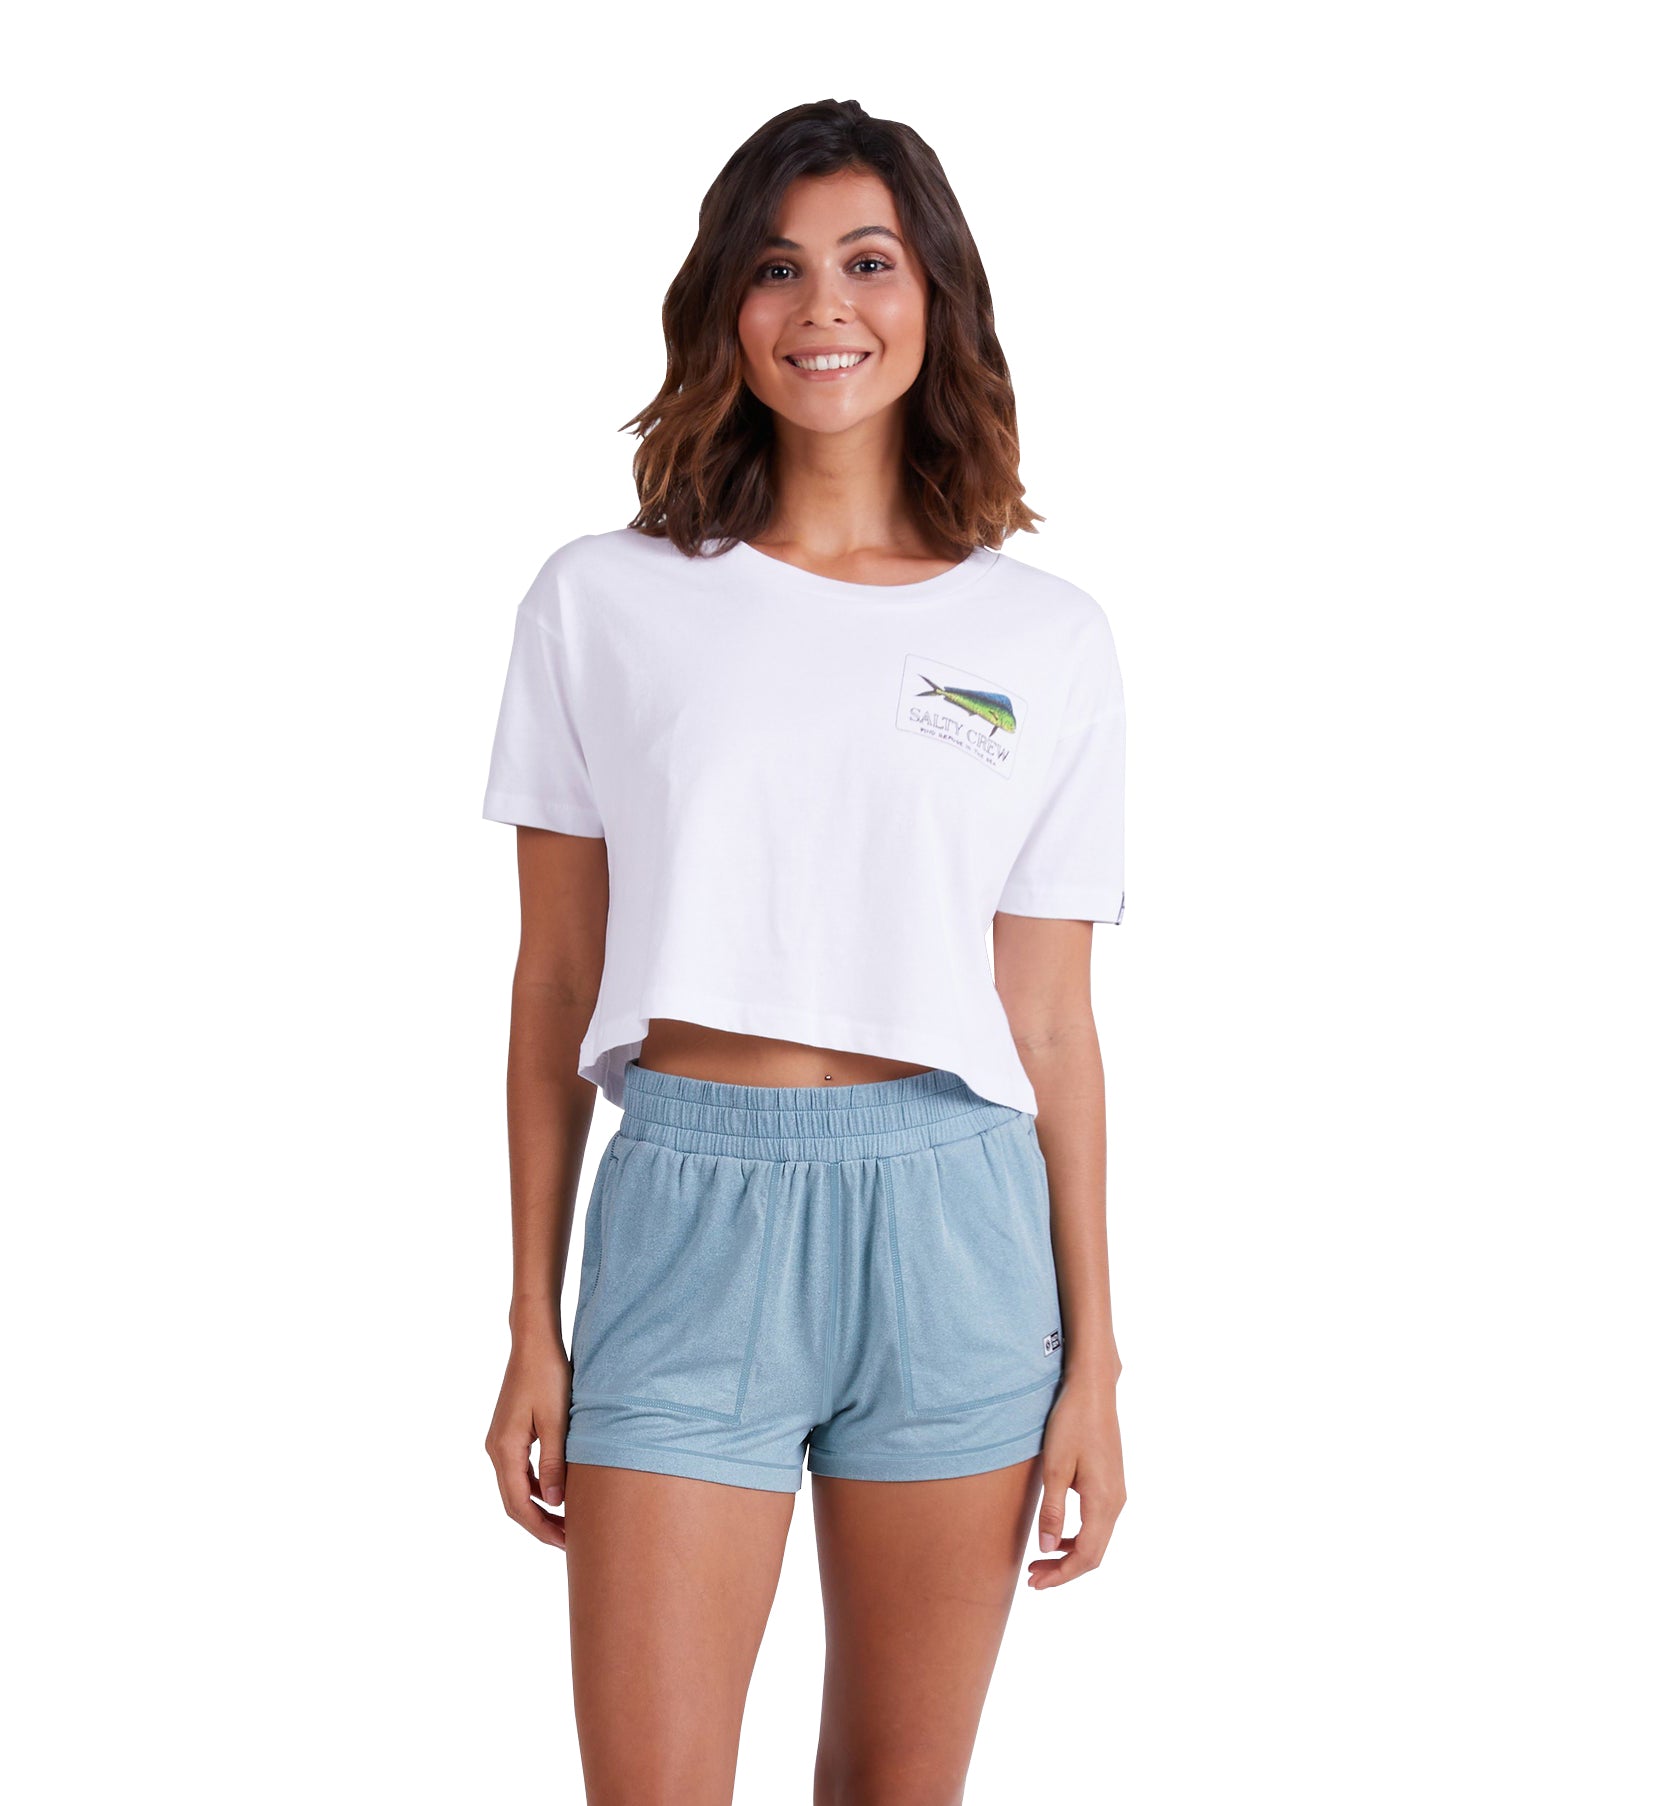 Salty Crew Womens Thrill Seekers Short